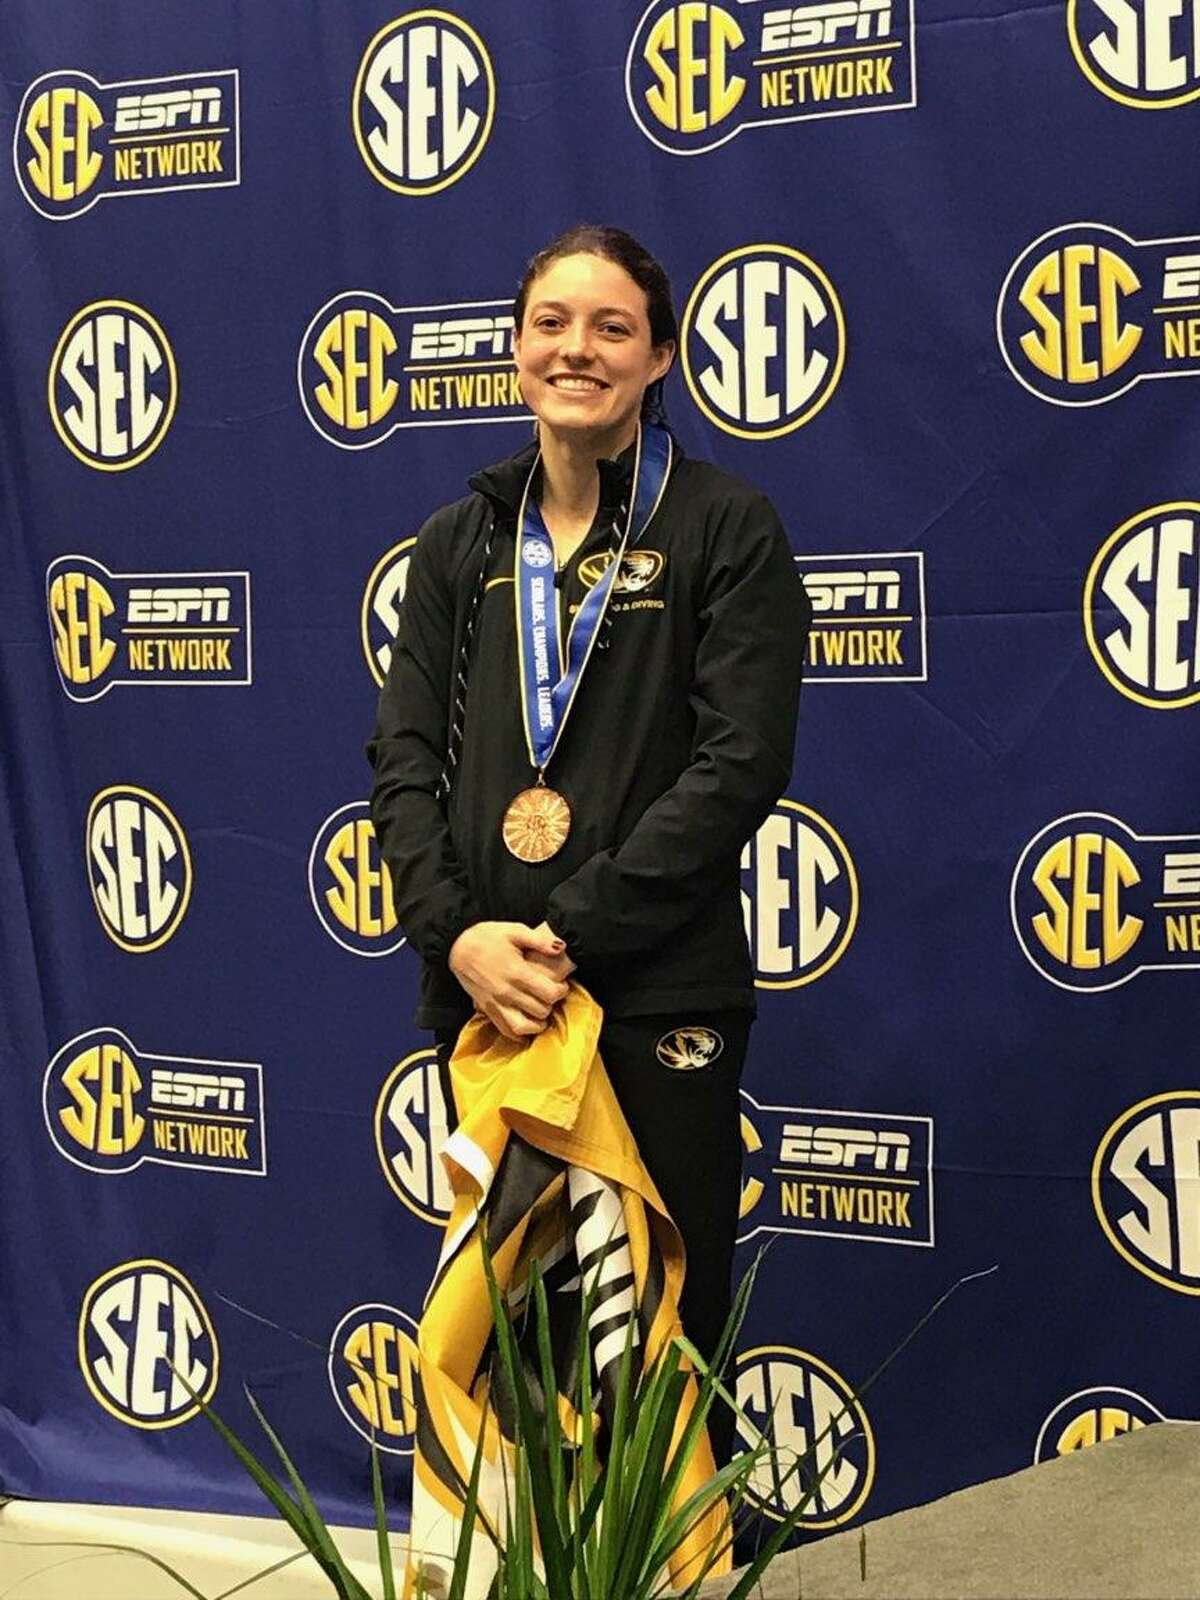 Montgomery High School graduate and University of Missouri senior Madeline McKernan took third place and earned a bronze medal in platform diving on Sunday at the SEC Swimming and Diving Championships that were held at Texas A&M.